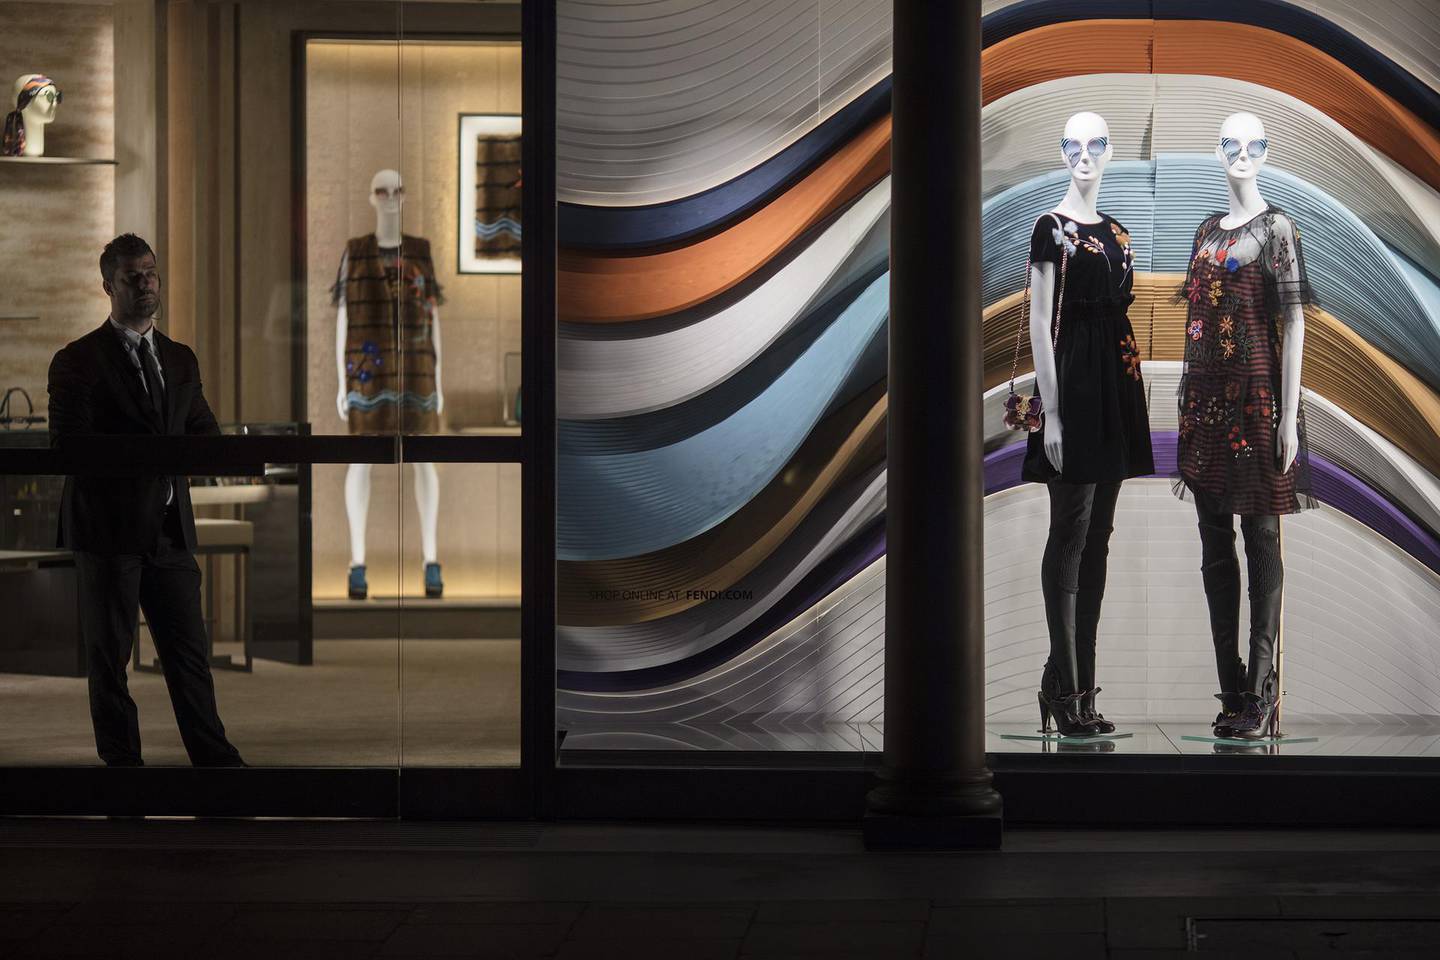 A security guard stands at the entrance to a Fendi SpA luxury goods store on New Bond Street in London, U.K., on Thursday, Oct. 27, 2016. Multiple reports show consumer confidence falling and a weakening of households’ spending power likely leading to a jump in inflation, which some economists see reaching 3 percent next year. Photographer: Simon Dawson/Bloomberg